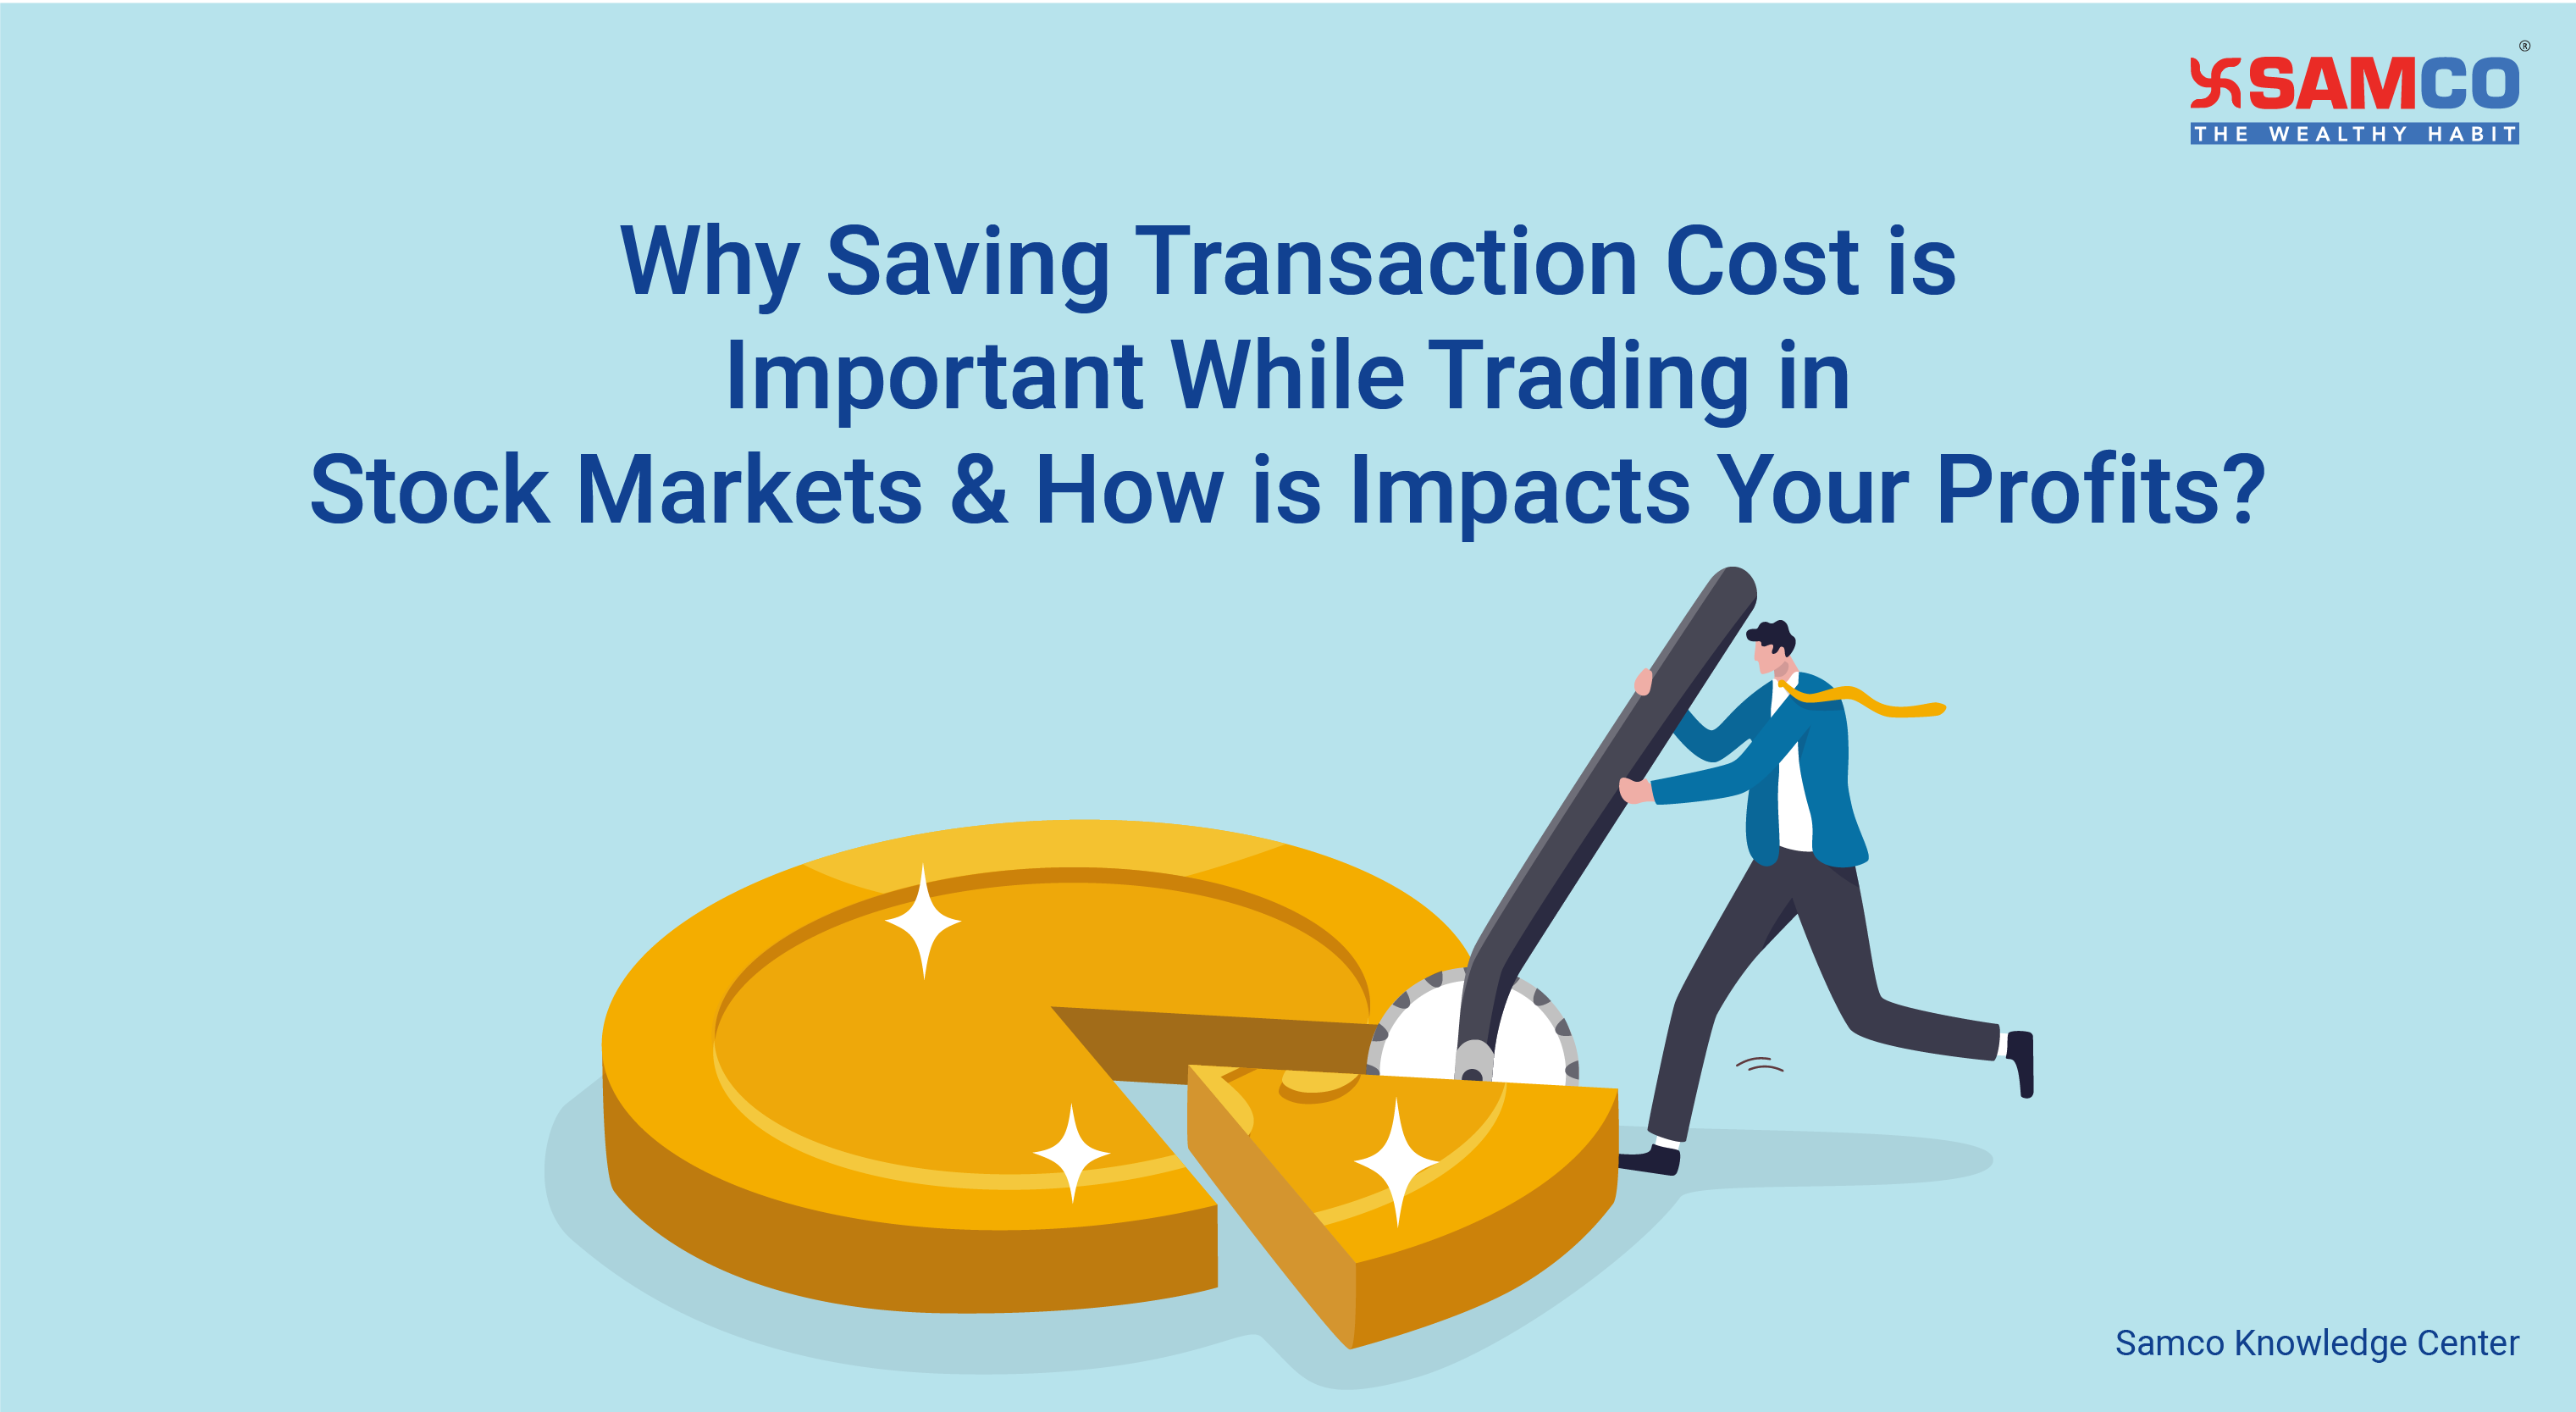 Why Saving Transaction Cost is Important While Trading in Stock Markets & How is Impacts Your Profits?